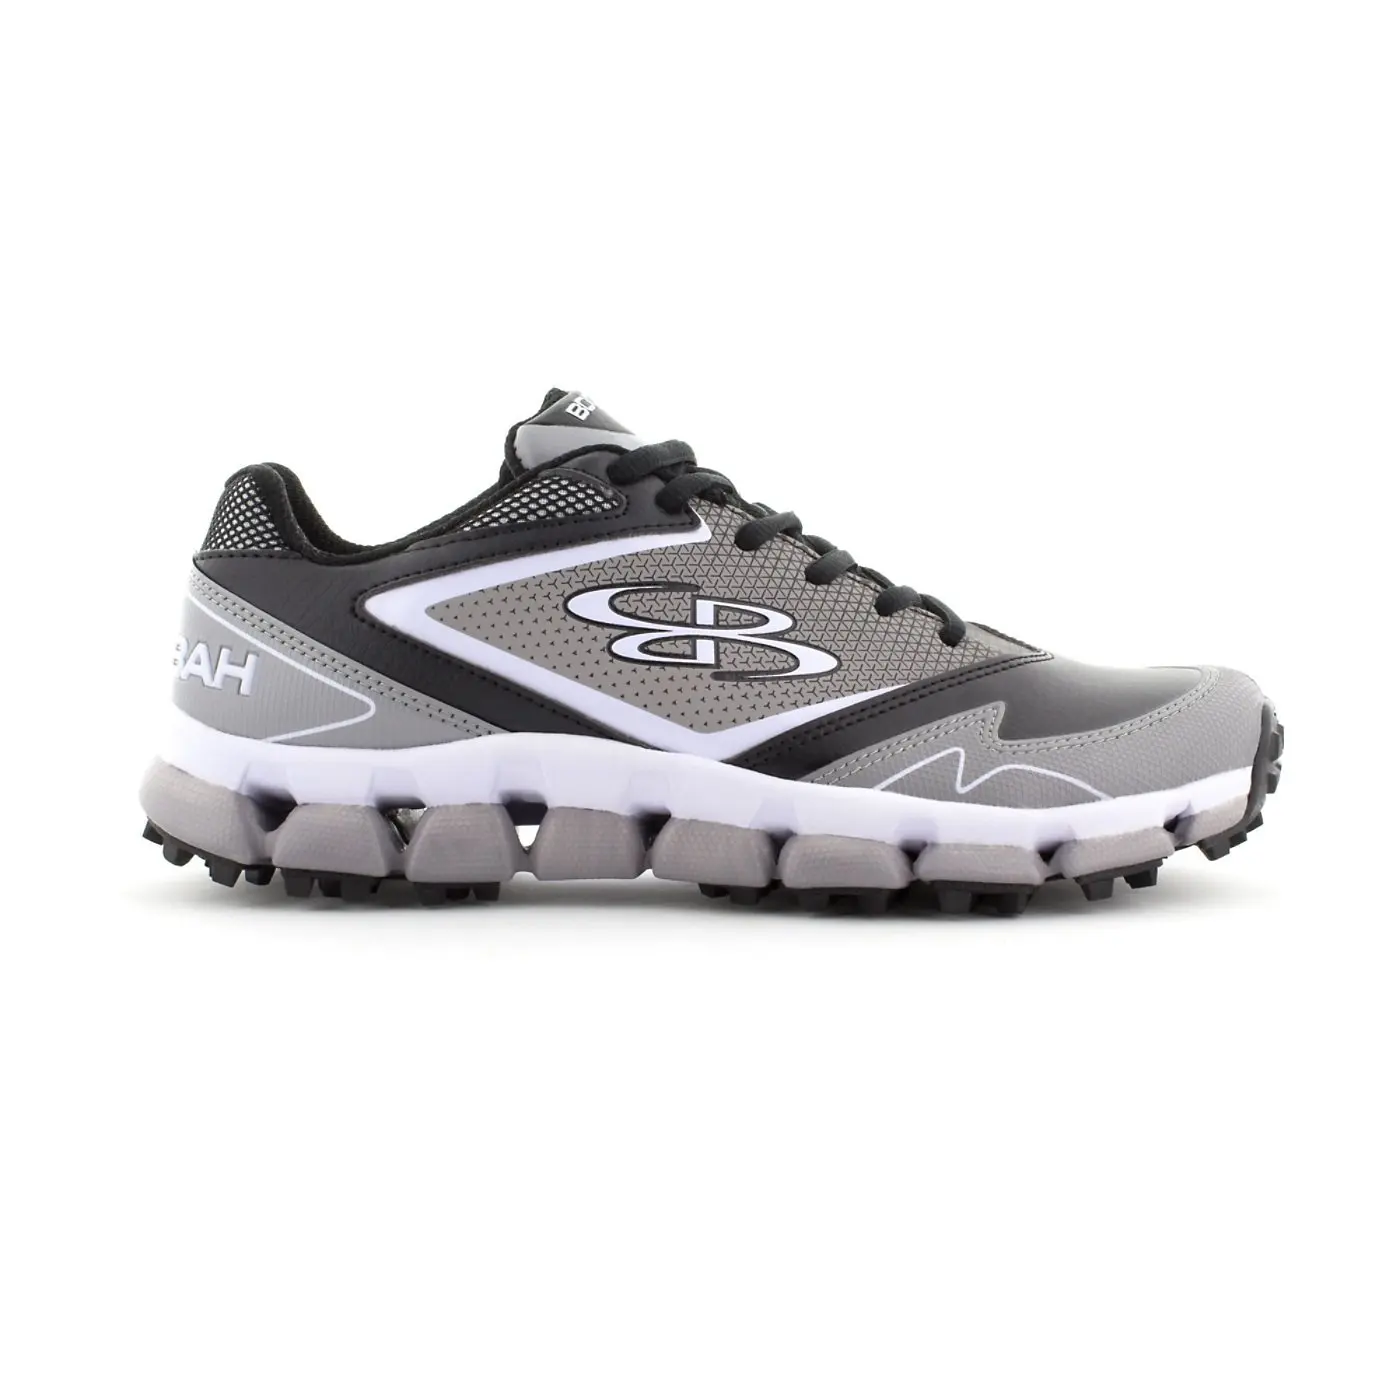 boombah shoes